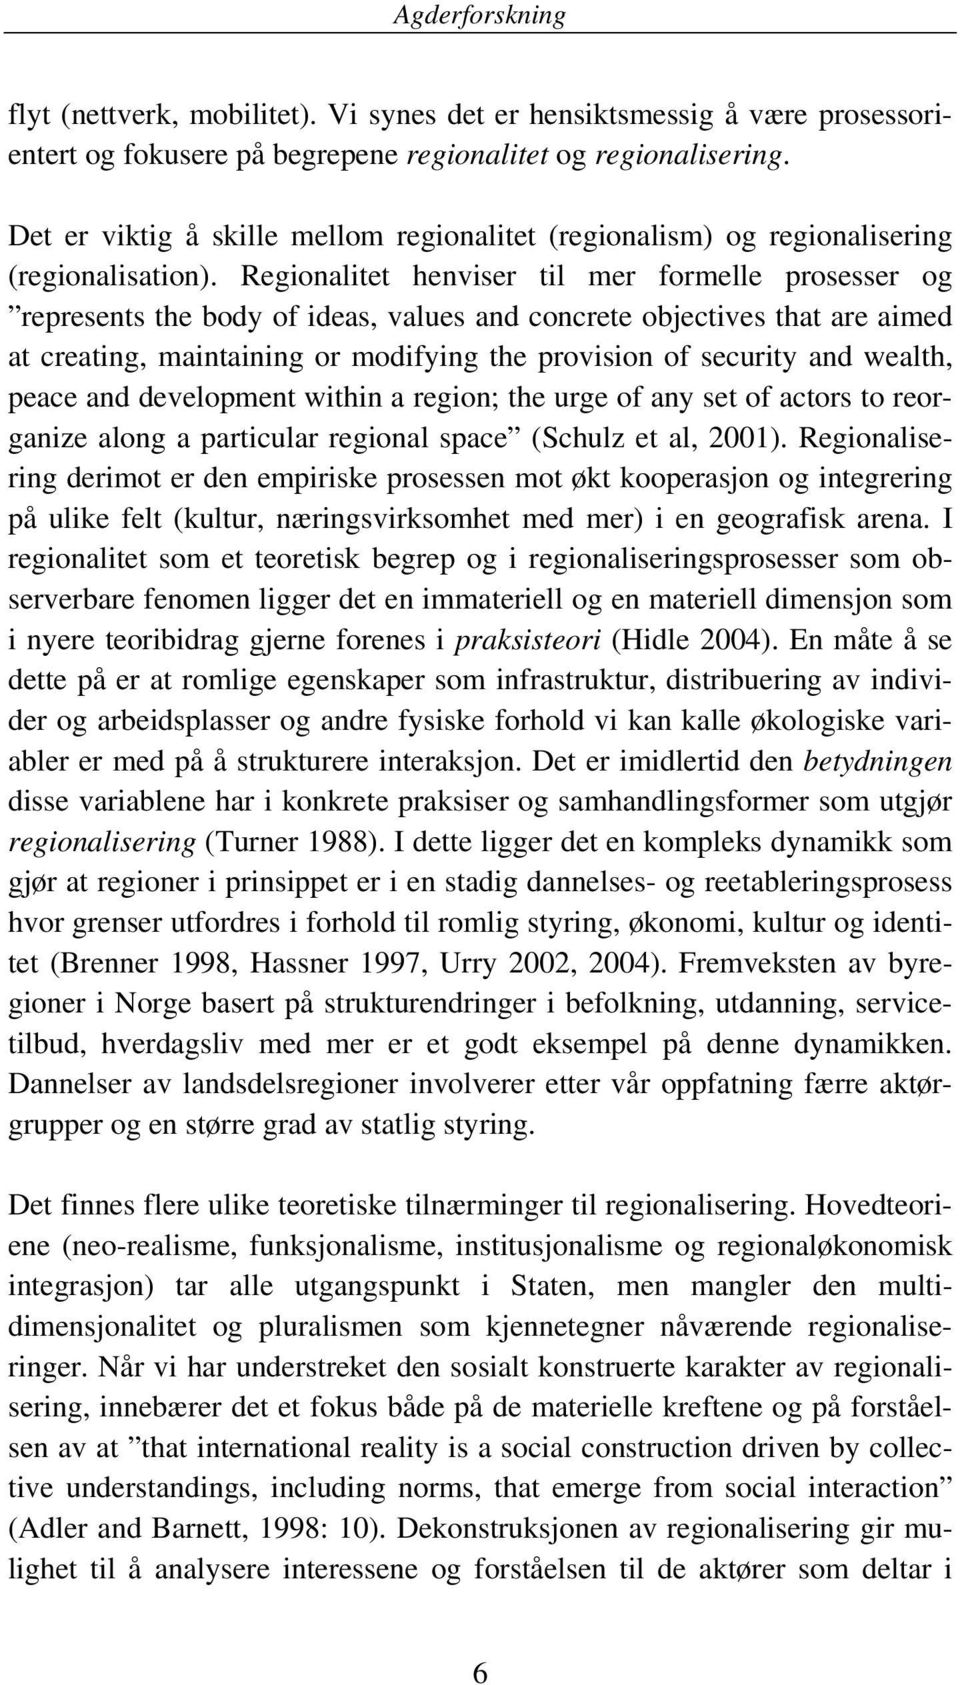 Regionalitet henviser til mer formelle prosesser og represents the body of ideas, values and concrete objectives that are aimed at creating, maintaining or modifying the provision of security and